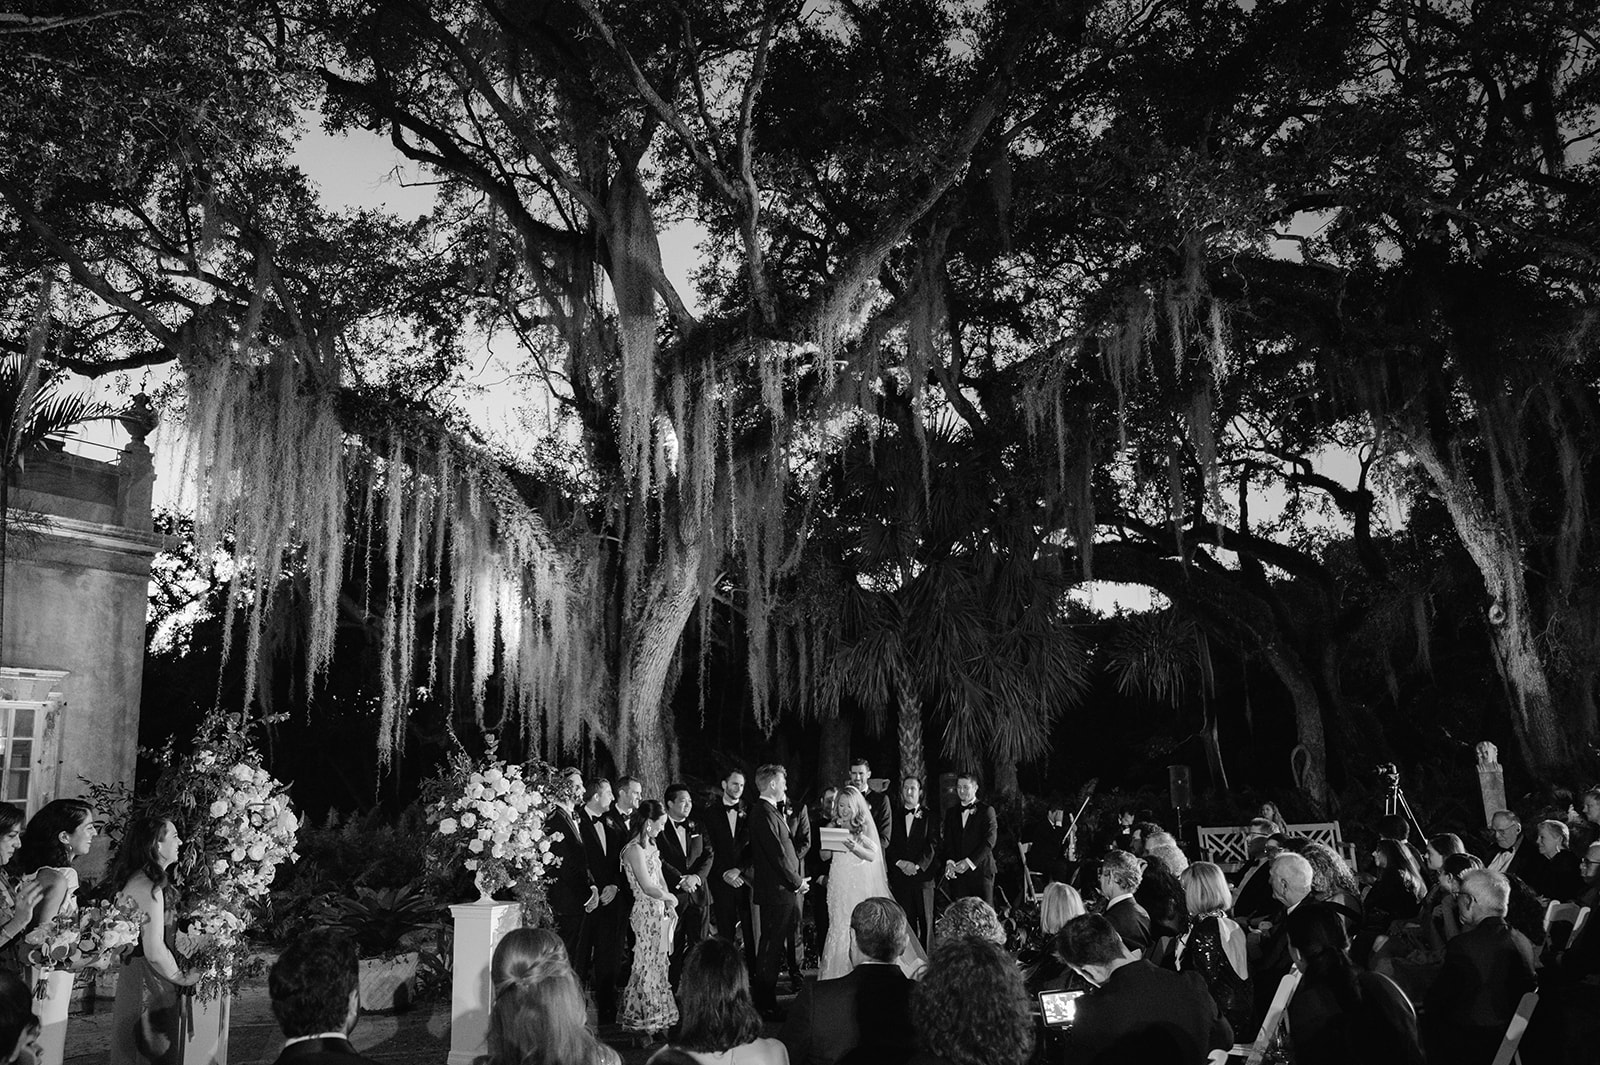 Nighttime wedding ceremony at Vizcaya Museum and Gardens.